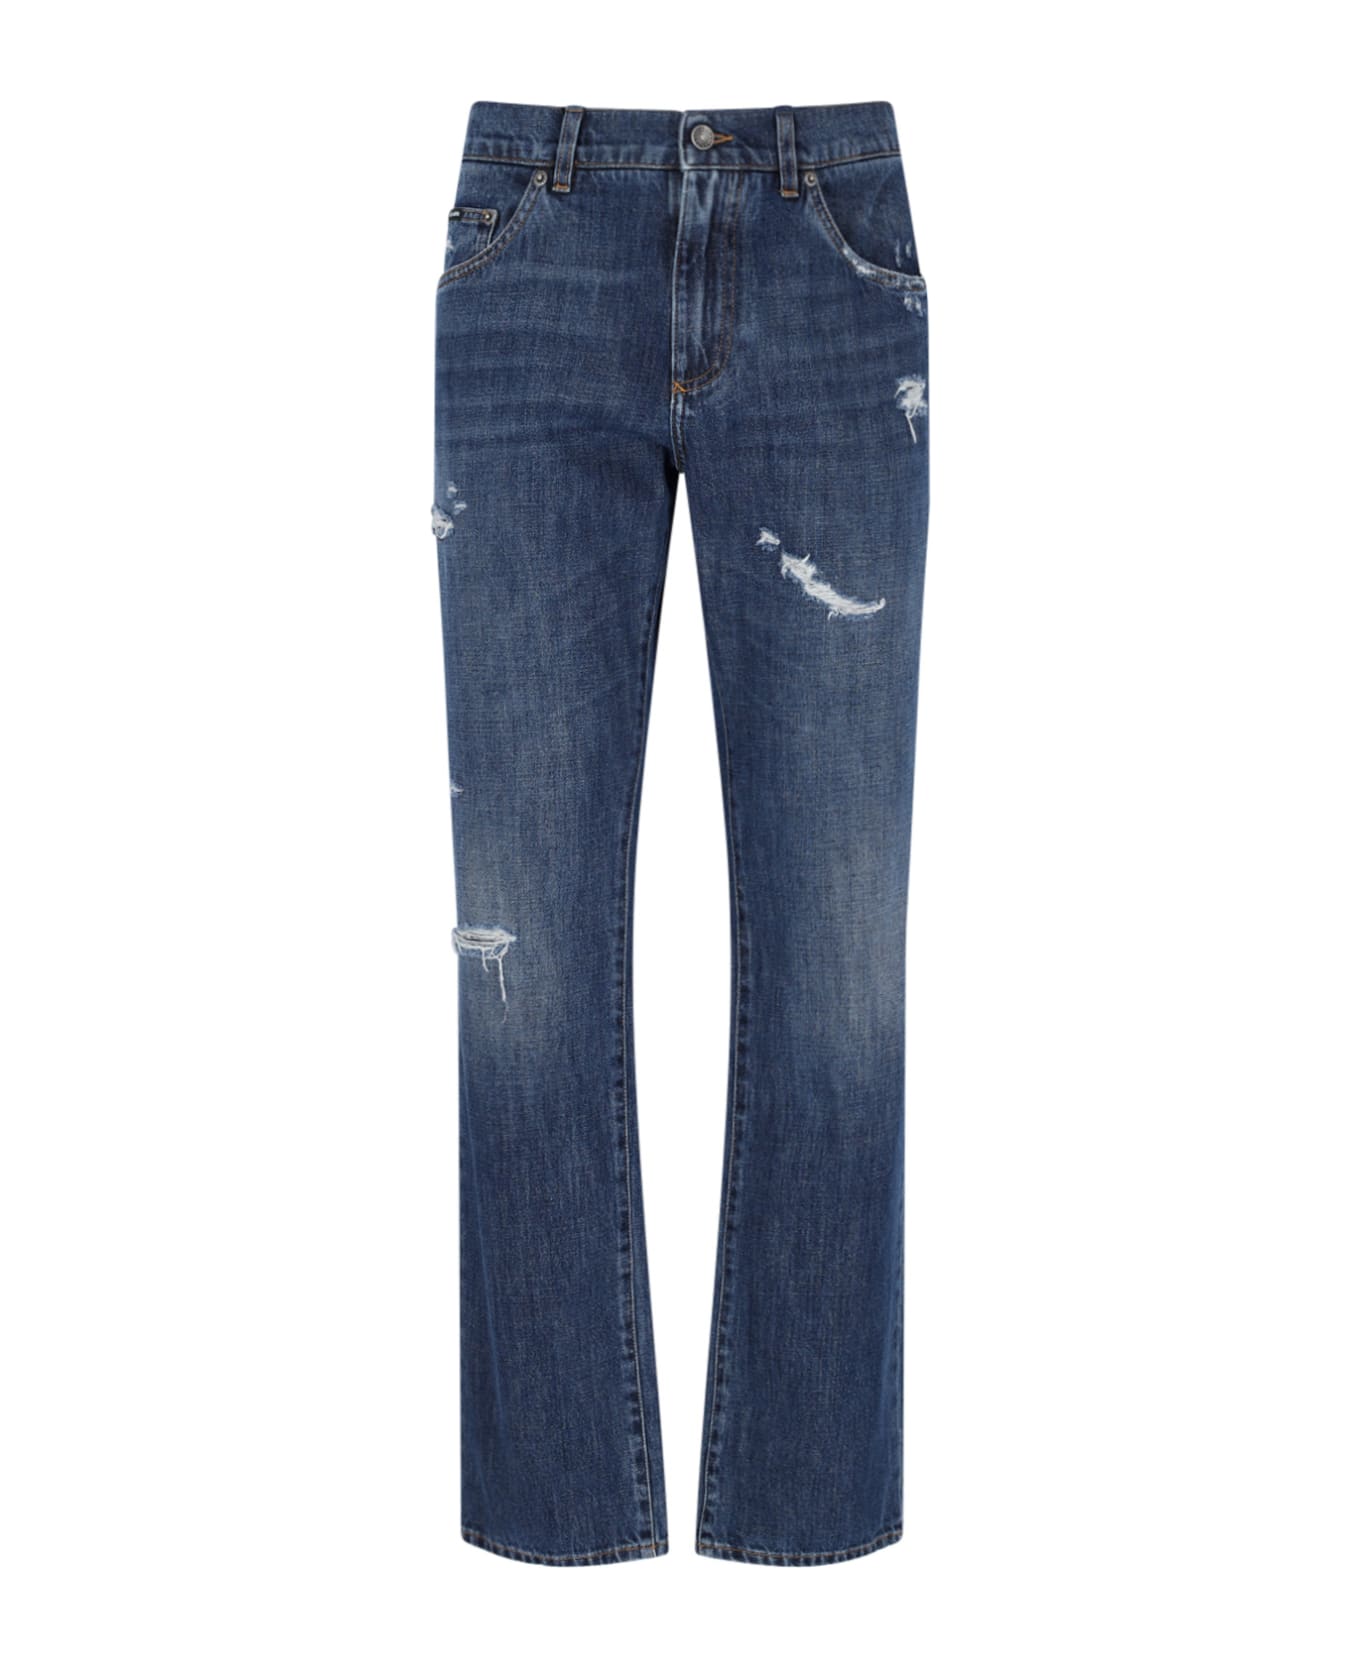 Dolce & Gabbana Jeans With Scraping - Light blue デニム